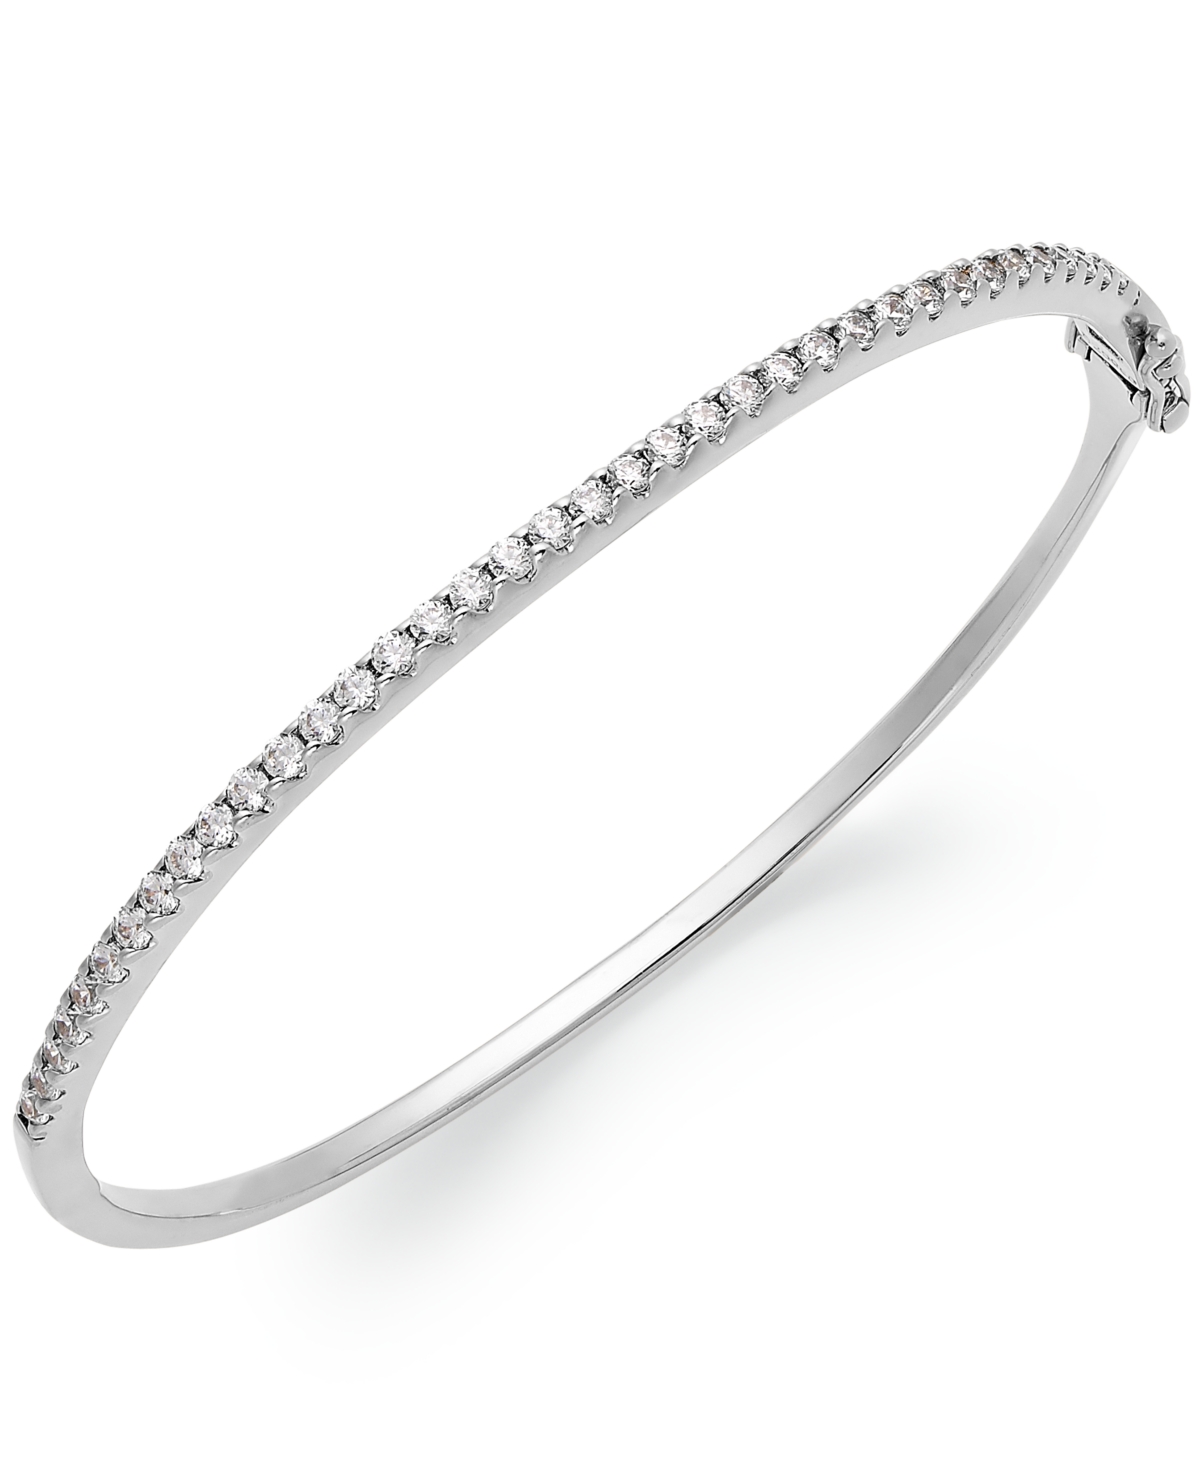 Sterling Silver Cubic Zirconia Bangle Bracelet (1-3/4 ct. t.w.) (Also available in 14k Gold over Sterling Silver) - Gold Over Silver